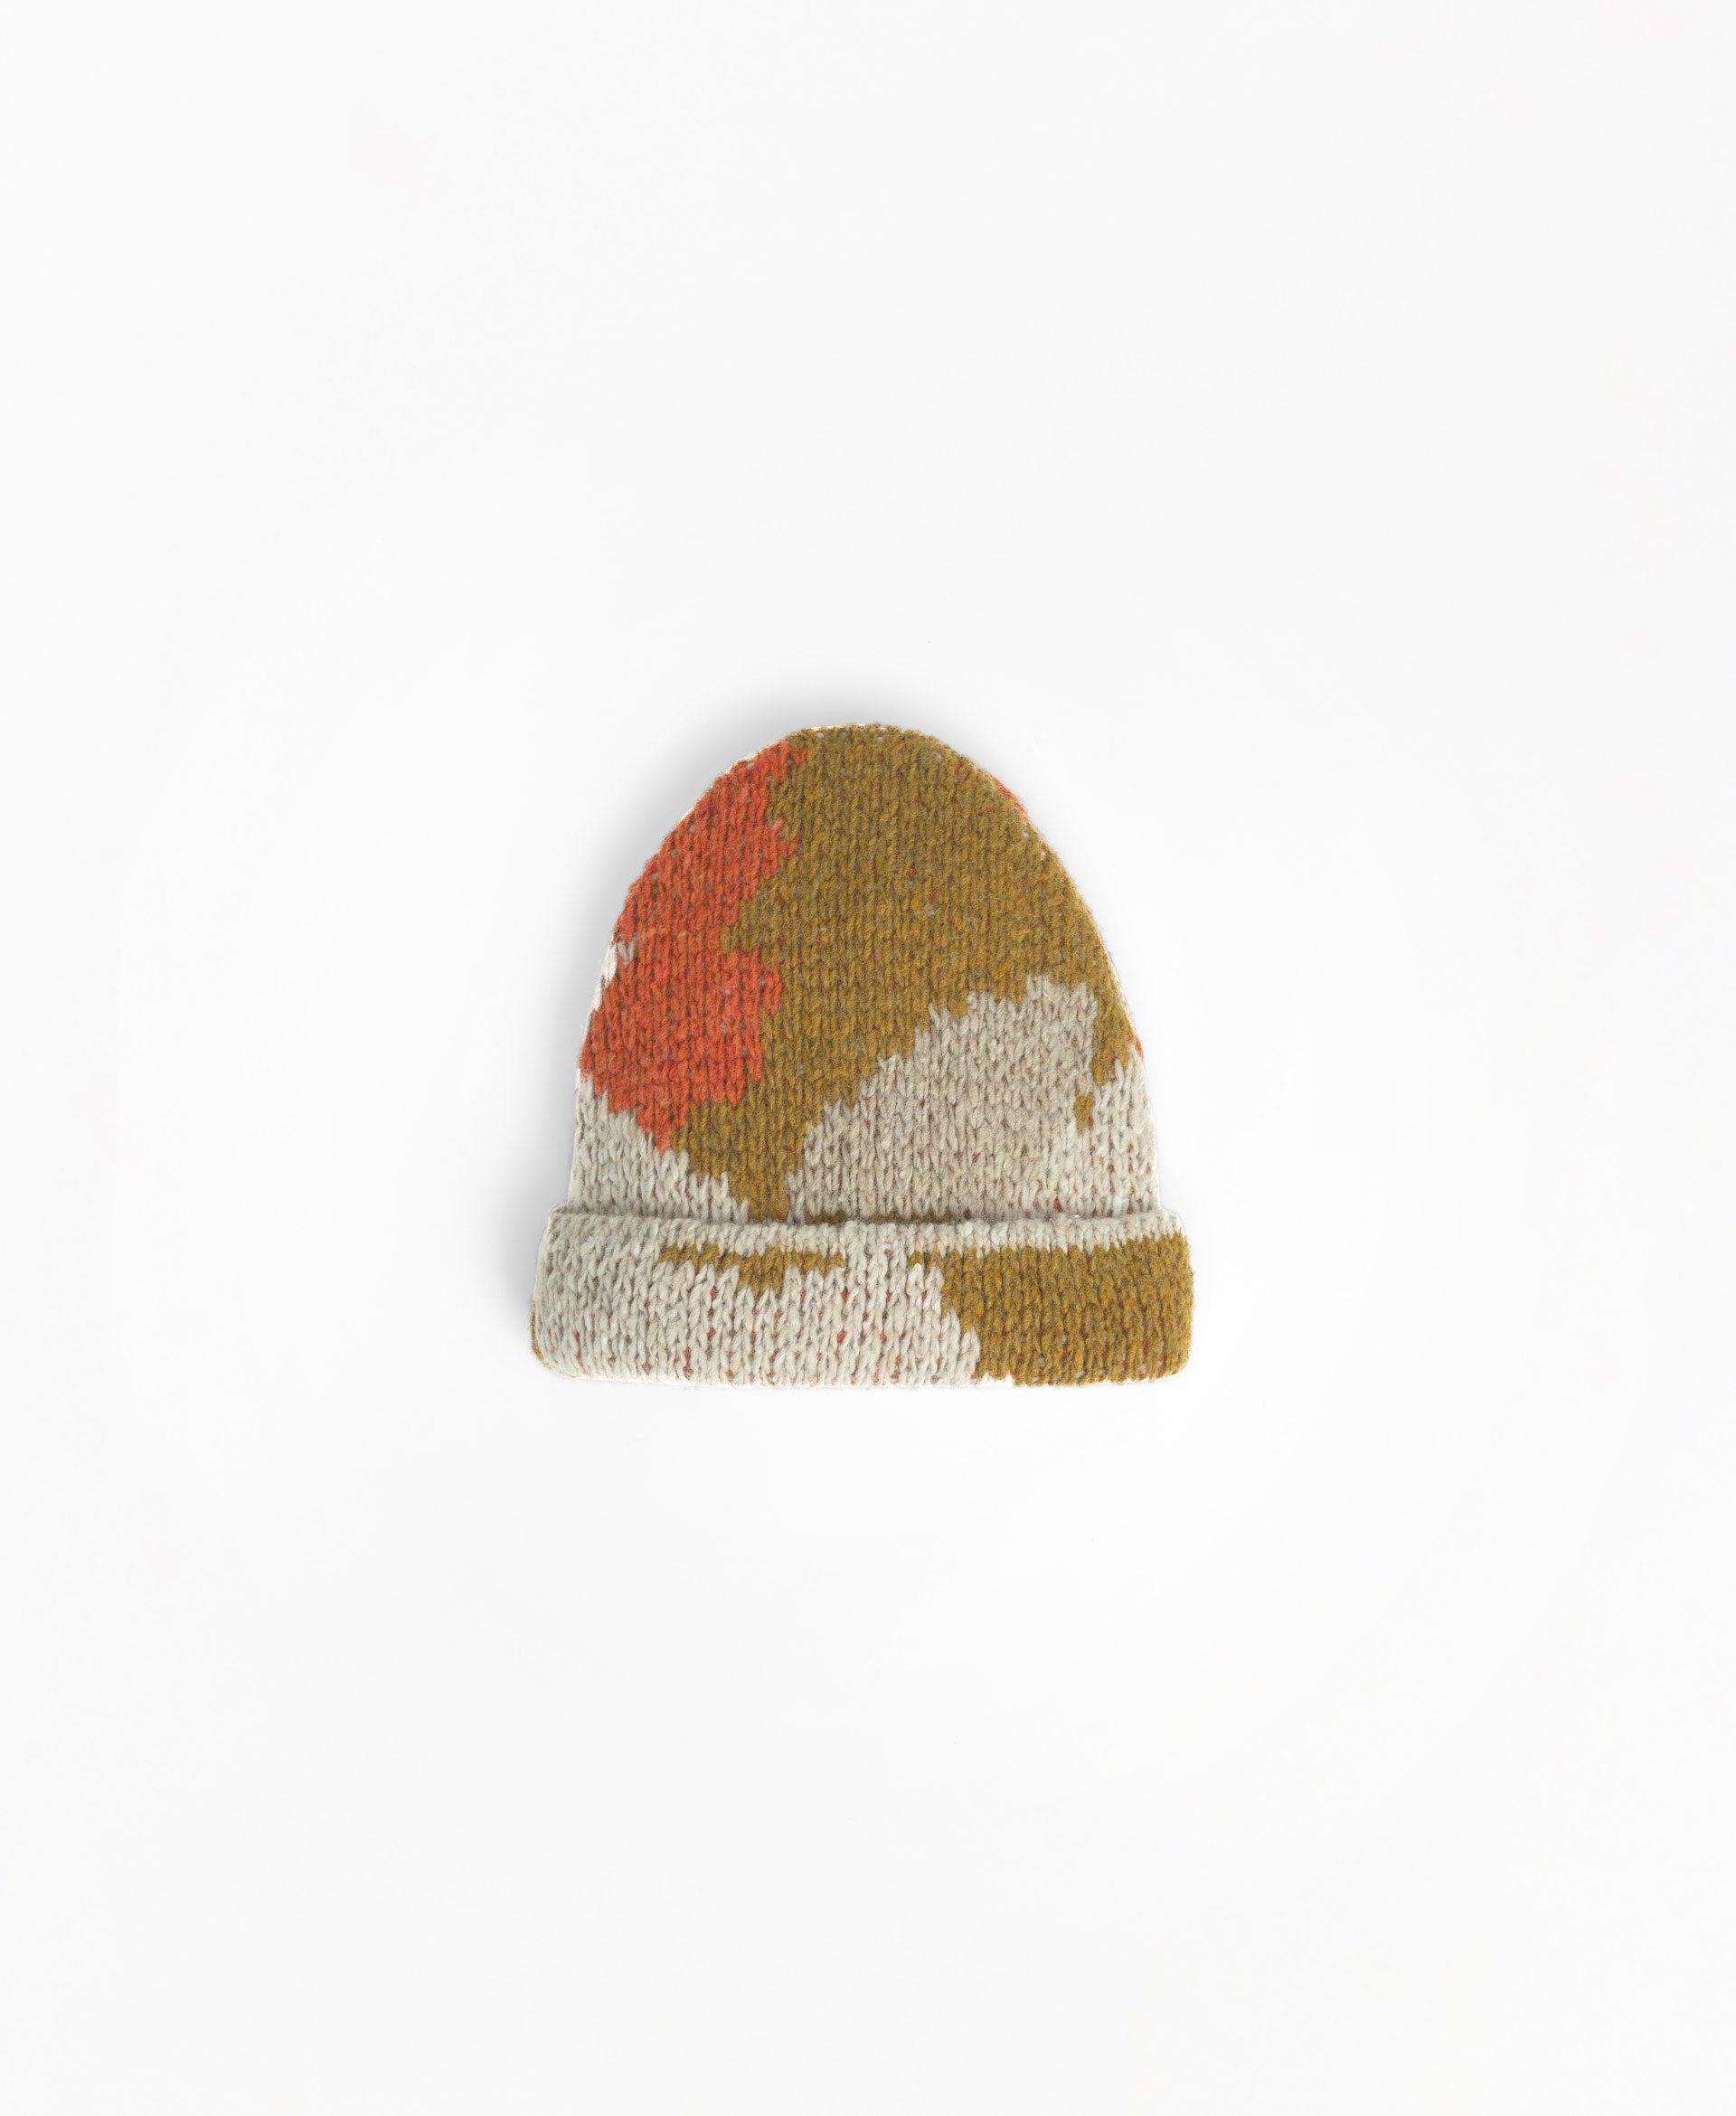 Knitted beanie with pattern